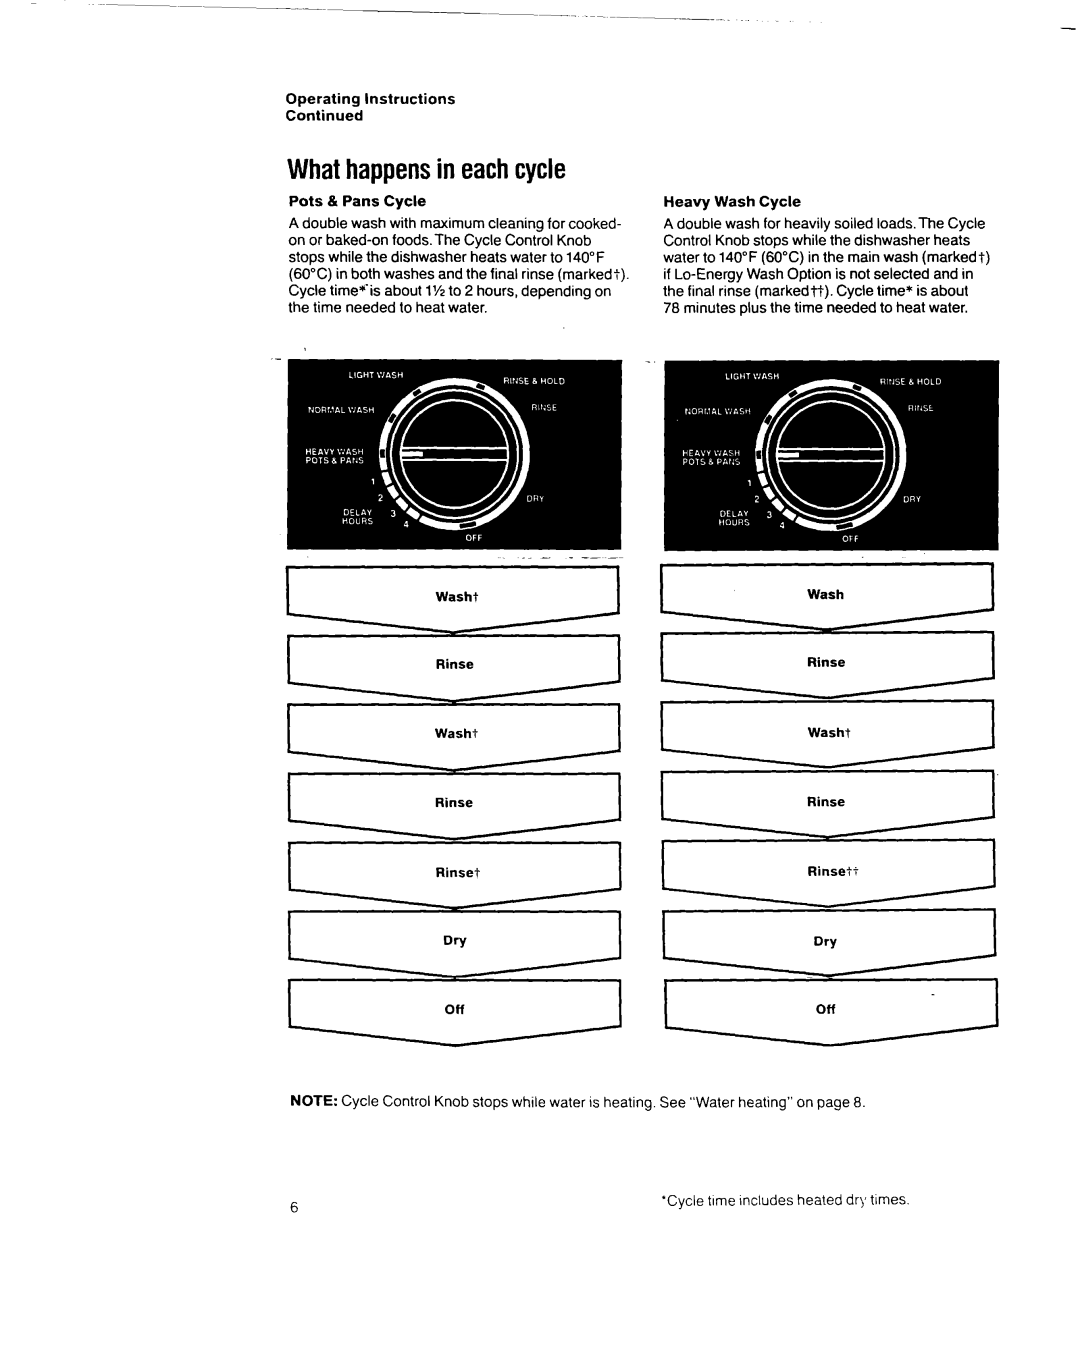 Whirlpool 8700 manual Whathappensin eachcycle 